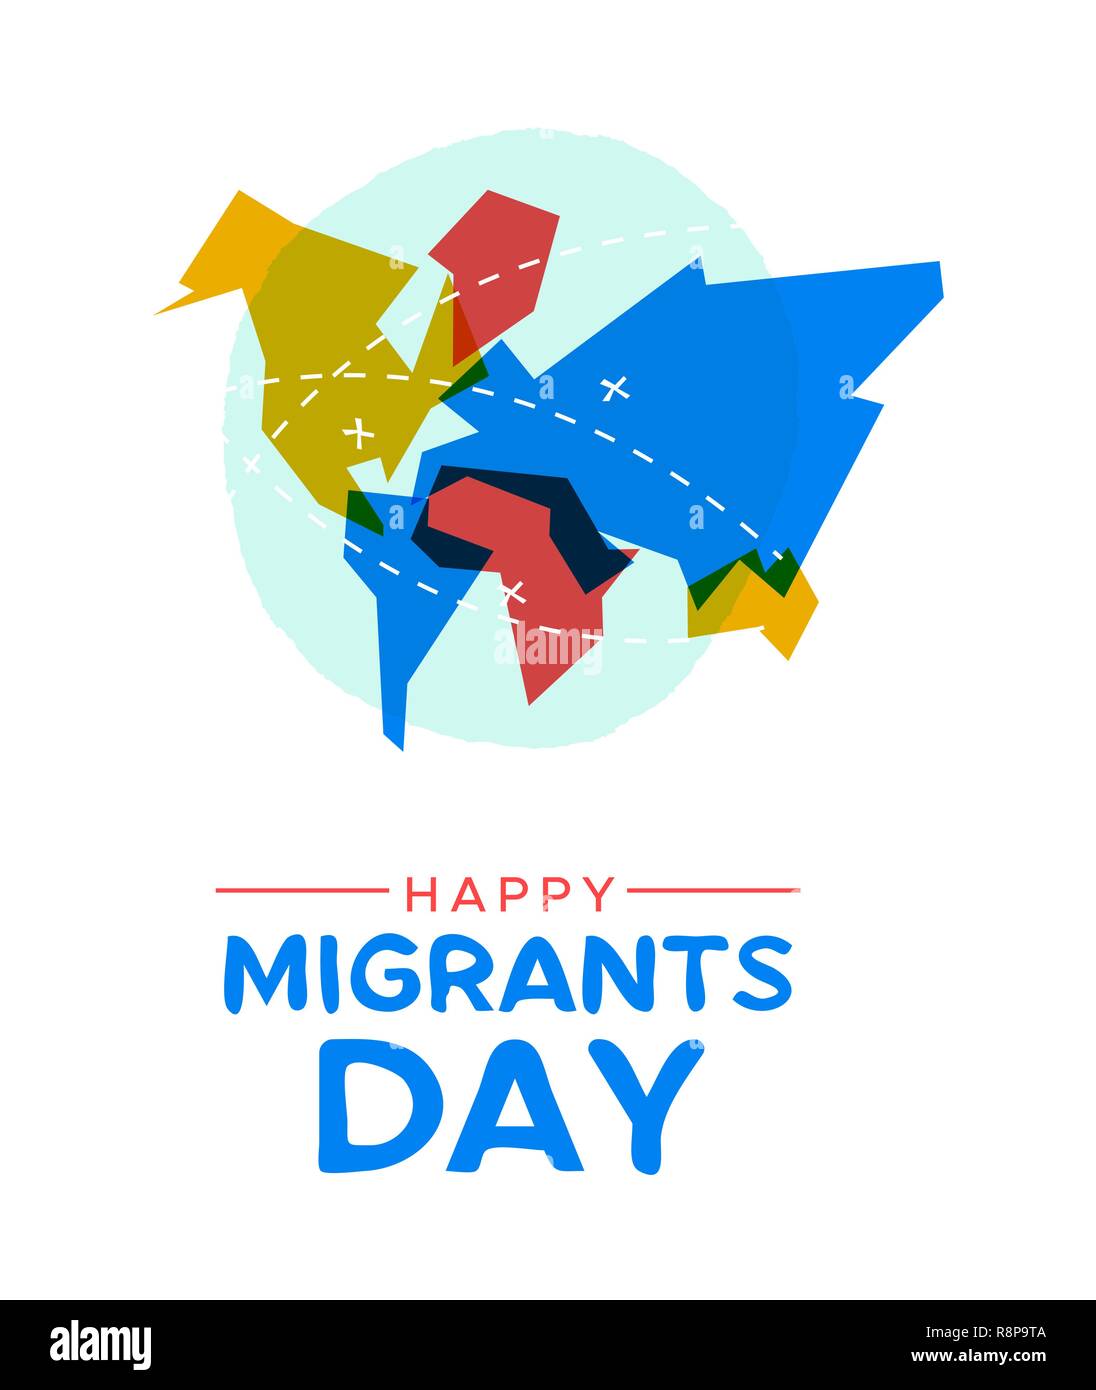 International Migrants Day greeting card illustration, colorful world map with travel marks and destinations for global migration or refugee movement  Stock Vector